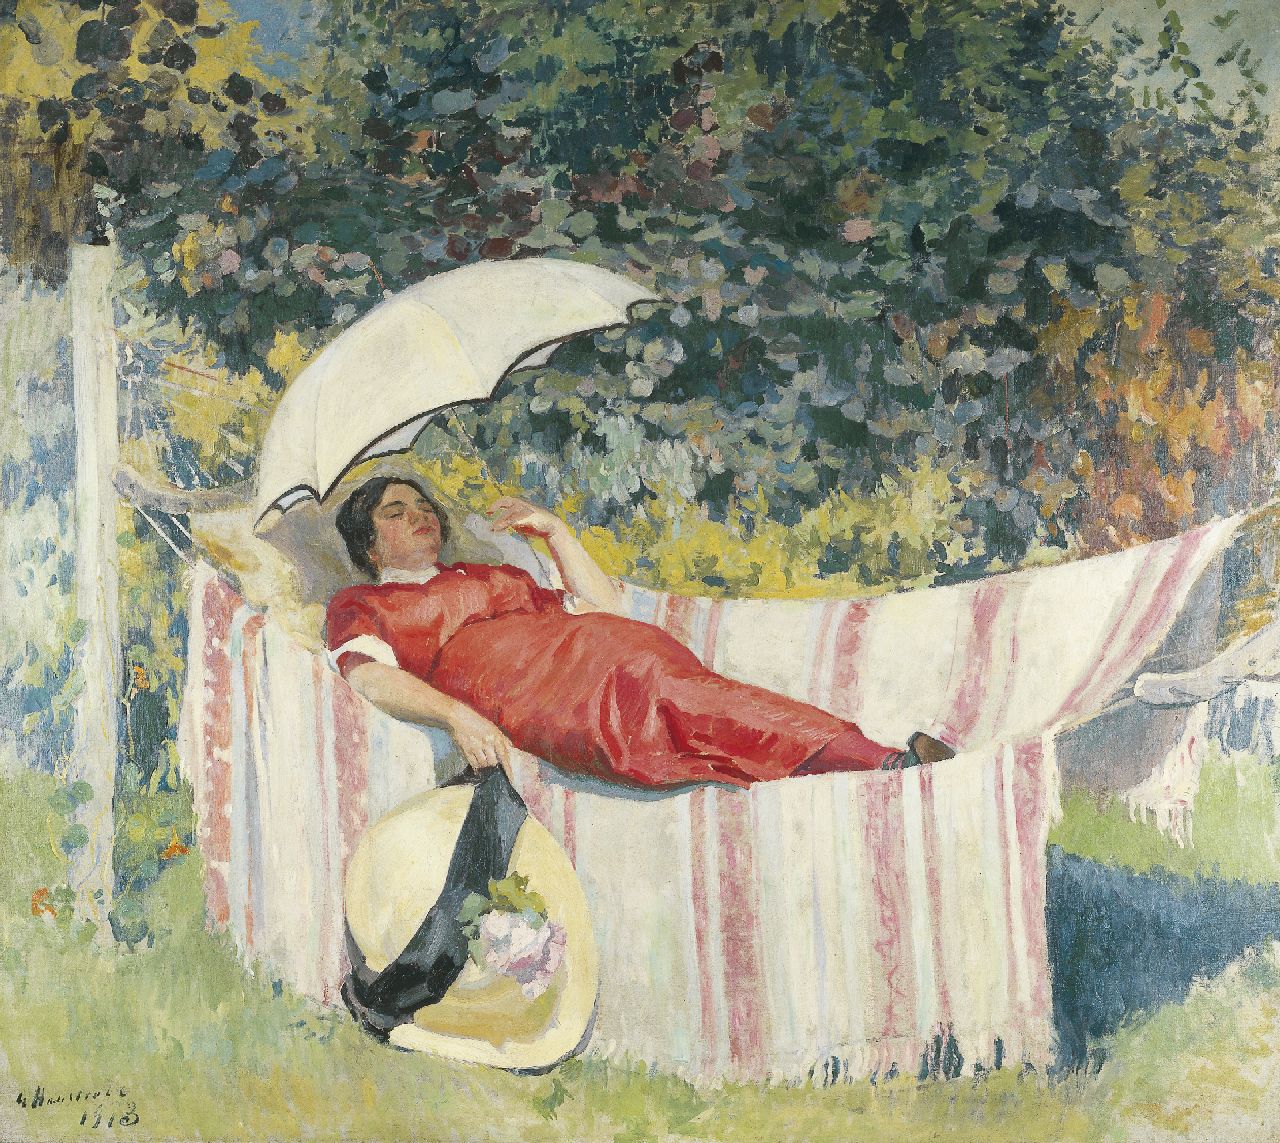 Haustrate G.  | Gaston Haustrate, Siësta in the hammock, oil on canvas 178.0 x 202.0 cm, signed l.l. and dated 1913